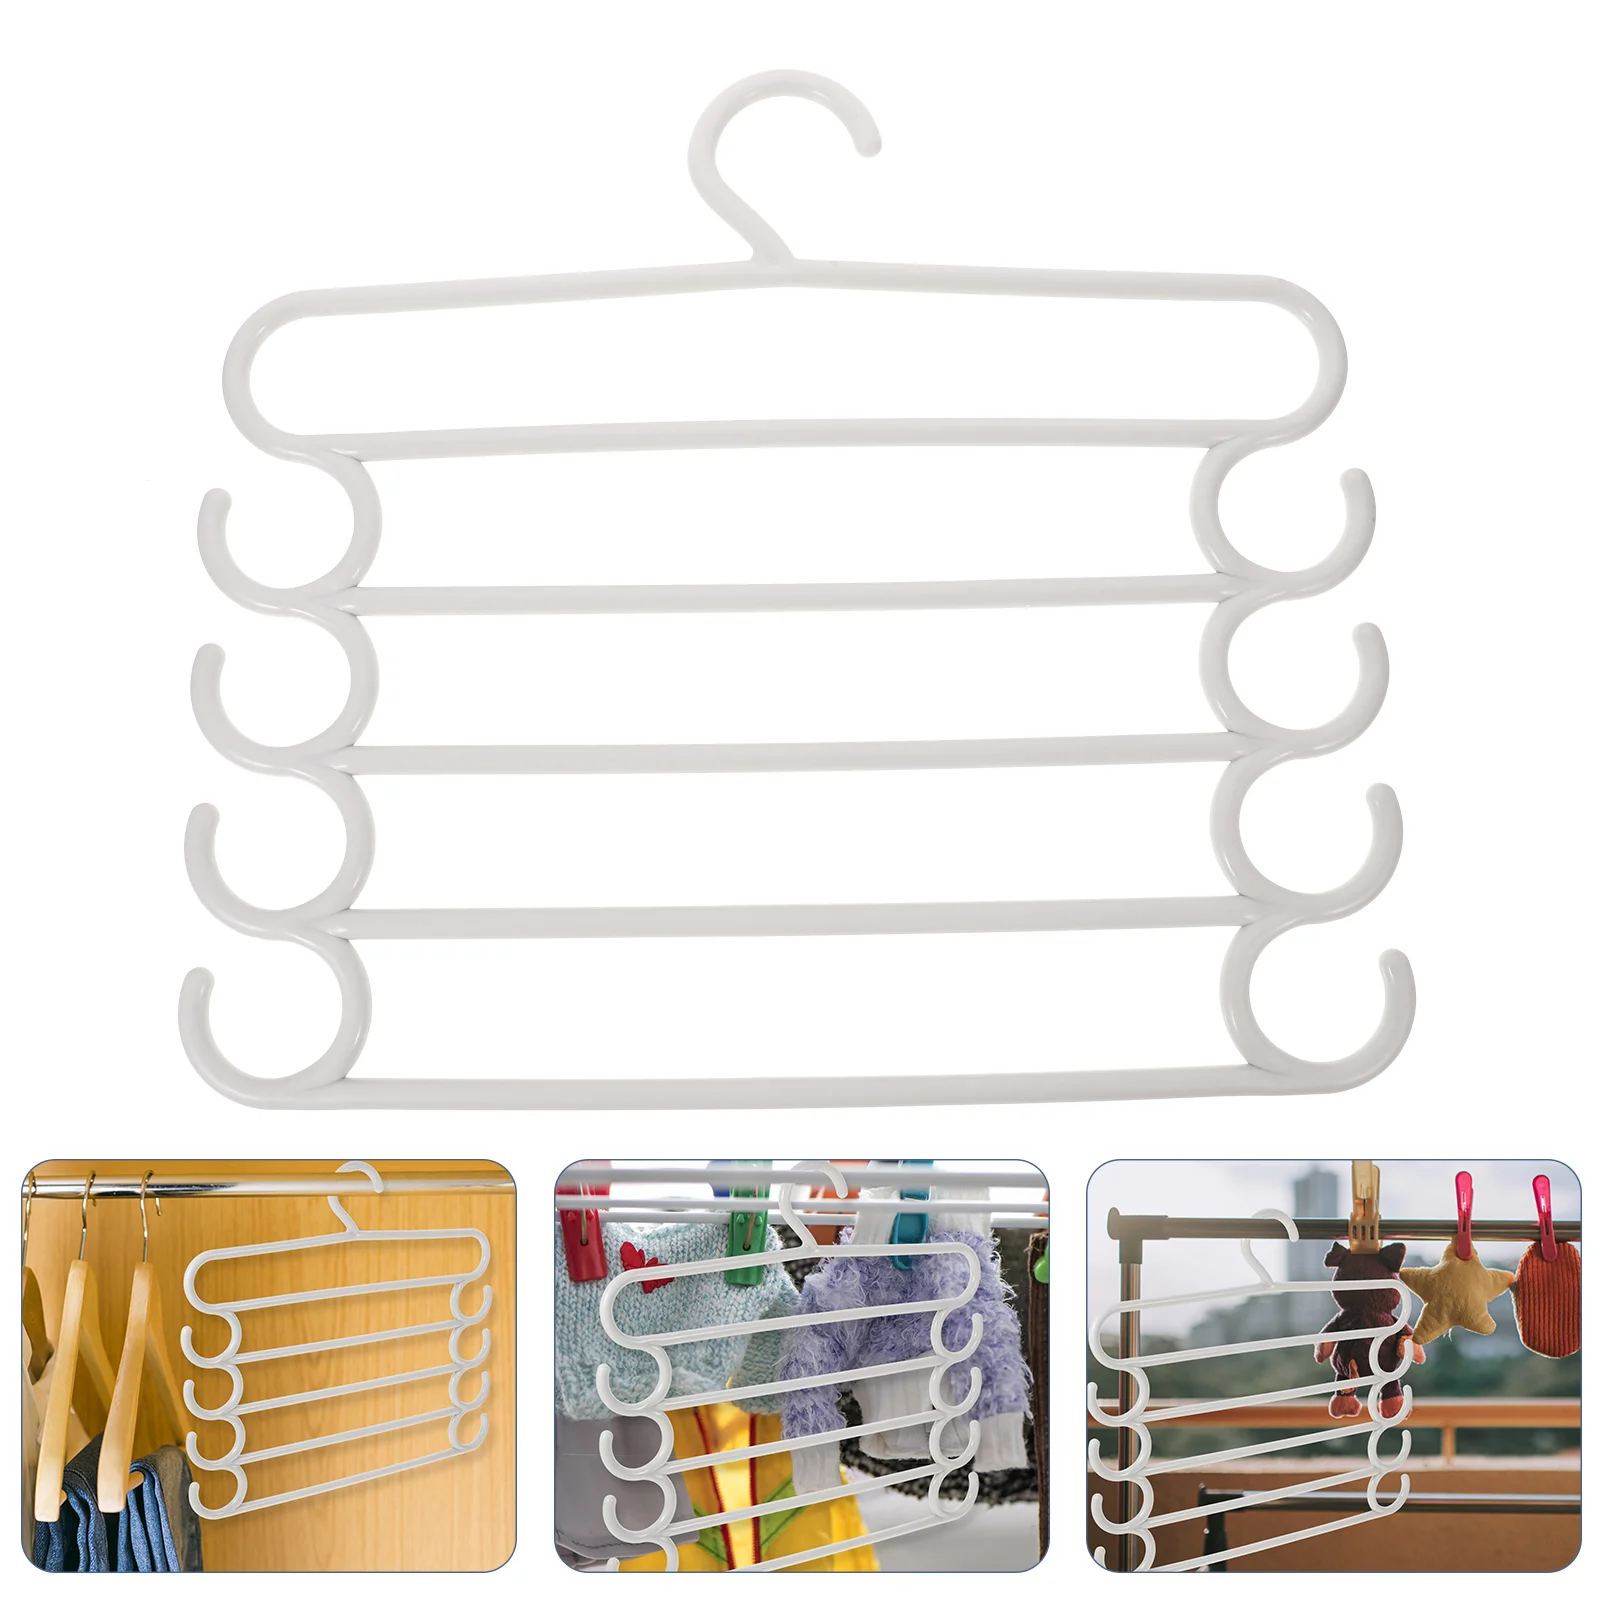 

5 Pcs Multi Layer Clothes Hanger Clothing Hangers Tie Hanging Racks Space Saving Home Pants Wrinkle-free Trousers Pp